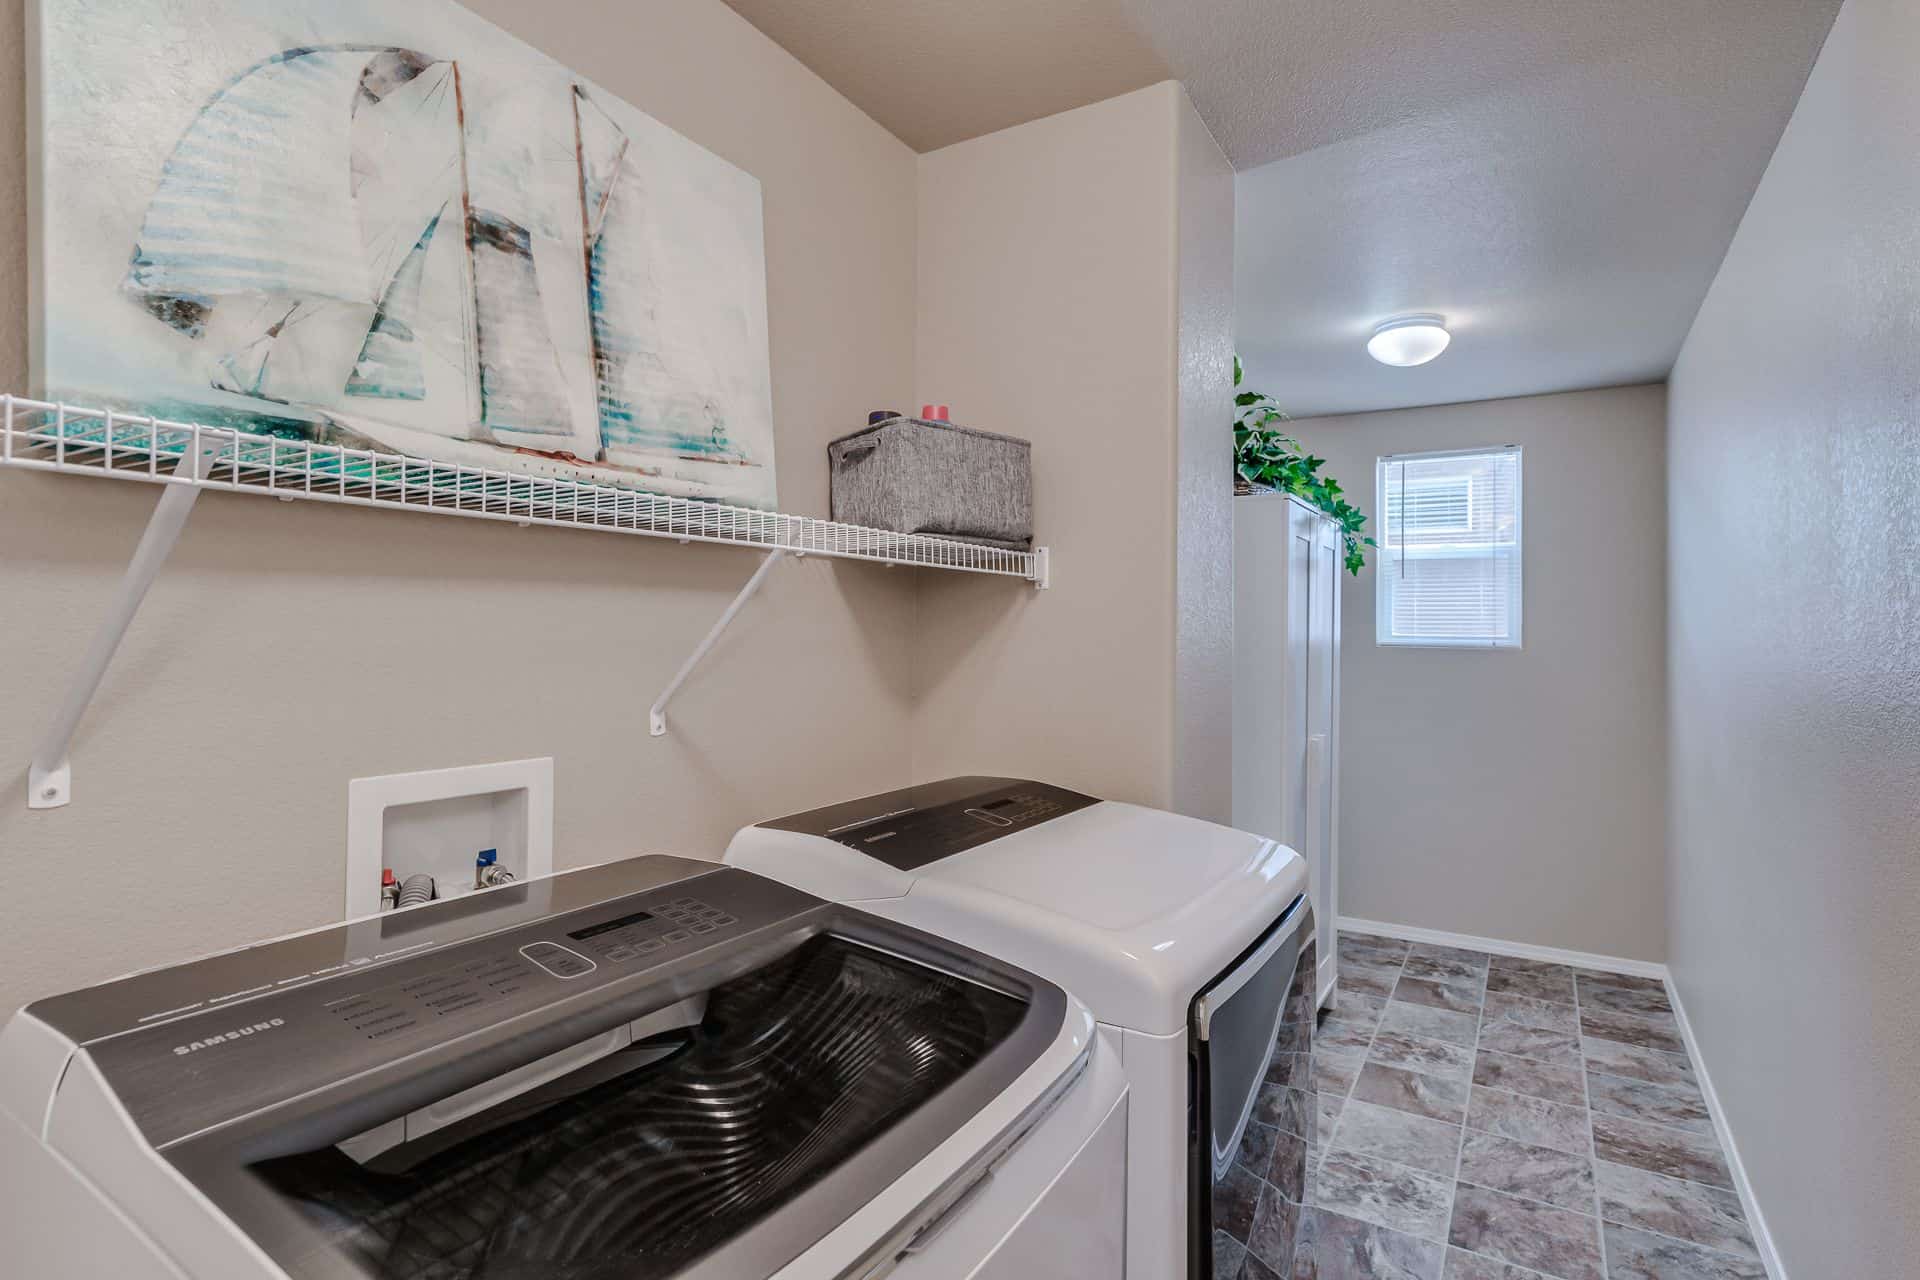 Laundry Room with Storage Space